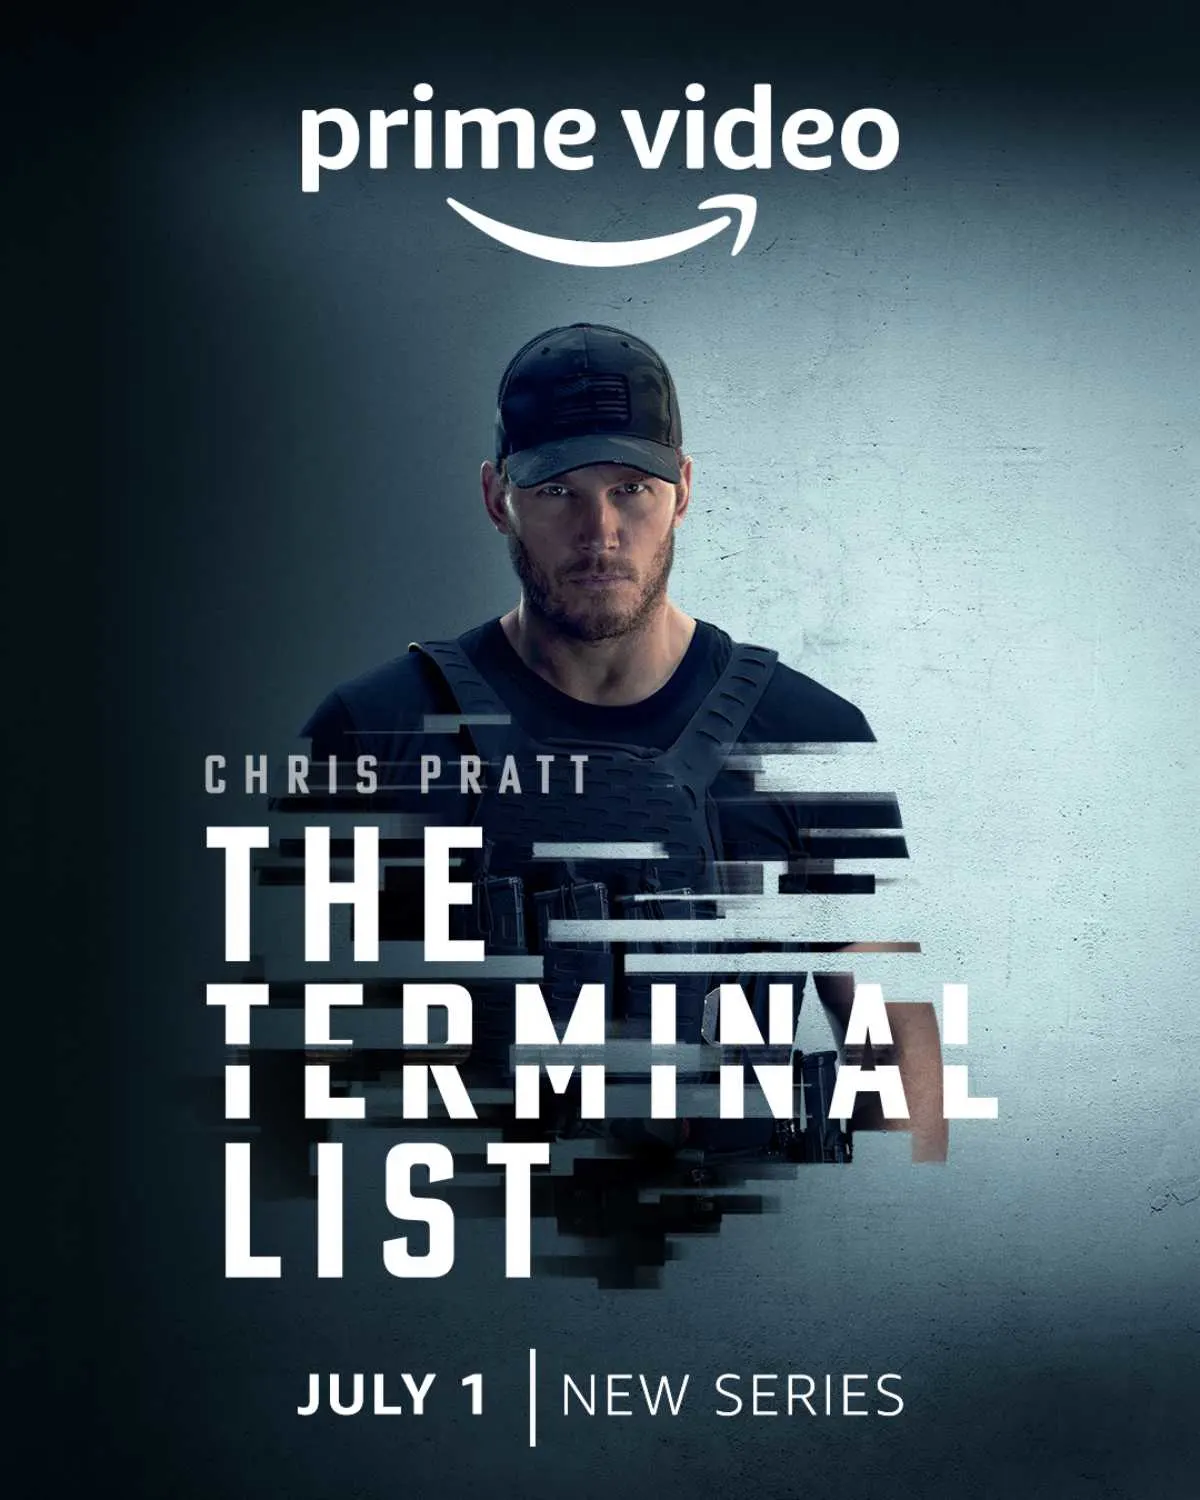 The Terminal List Trailer and Key Art Debut